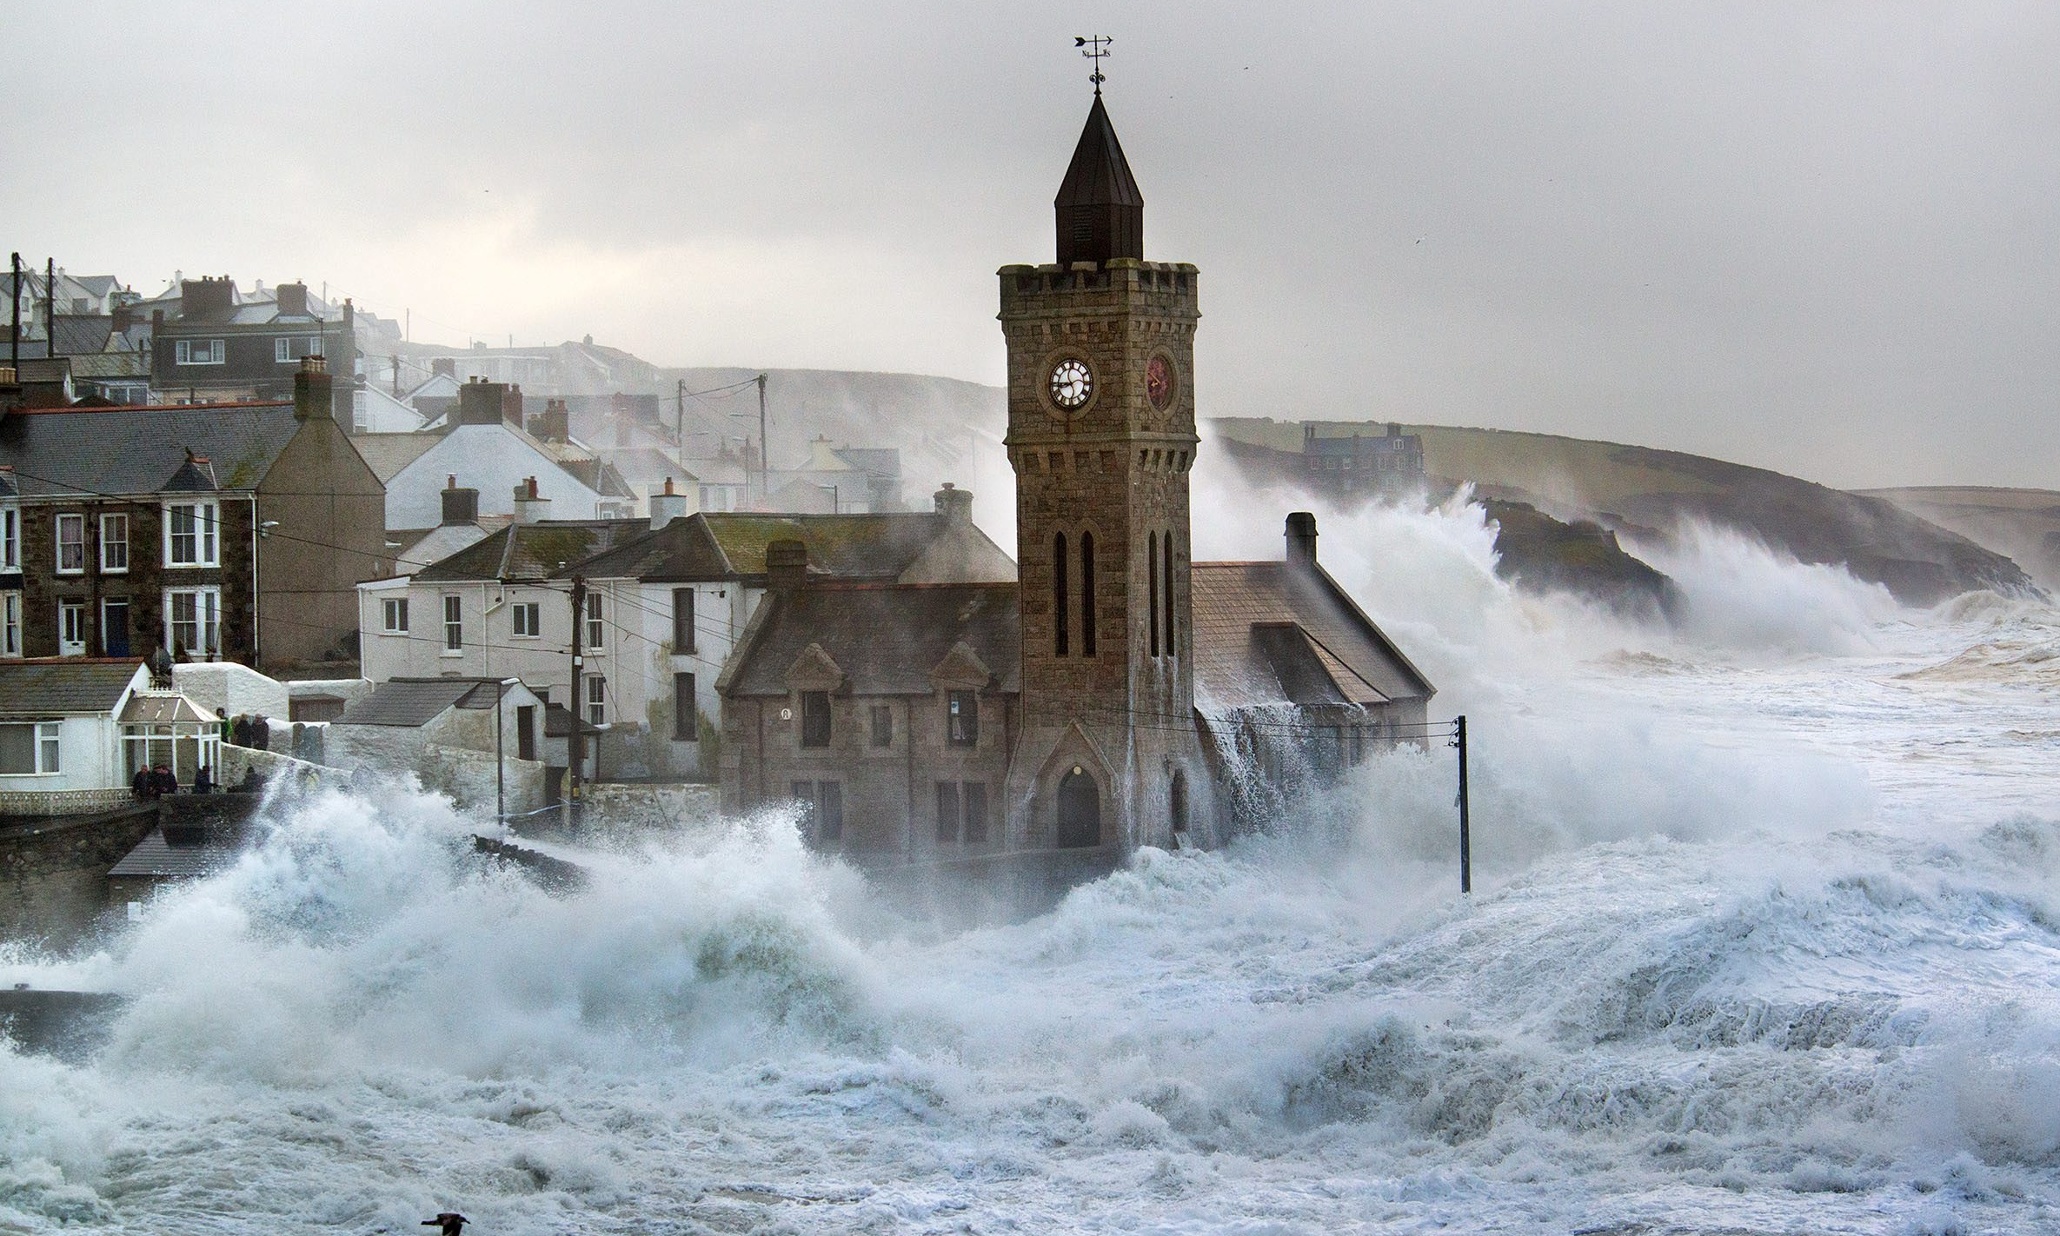 UK storms: rail chaos and more homes evacuated | Environment | The Guardian